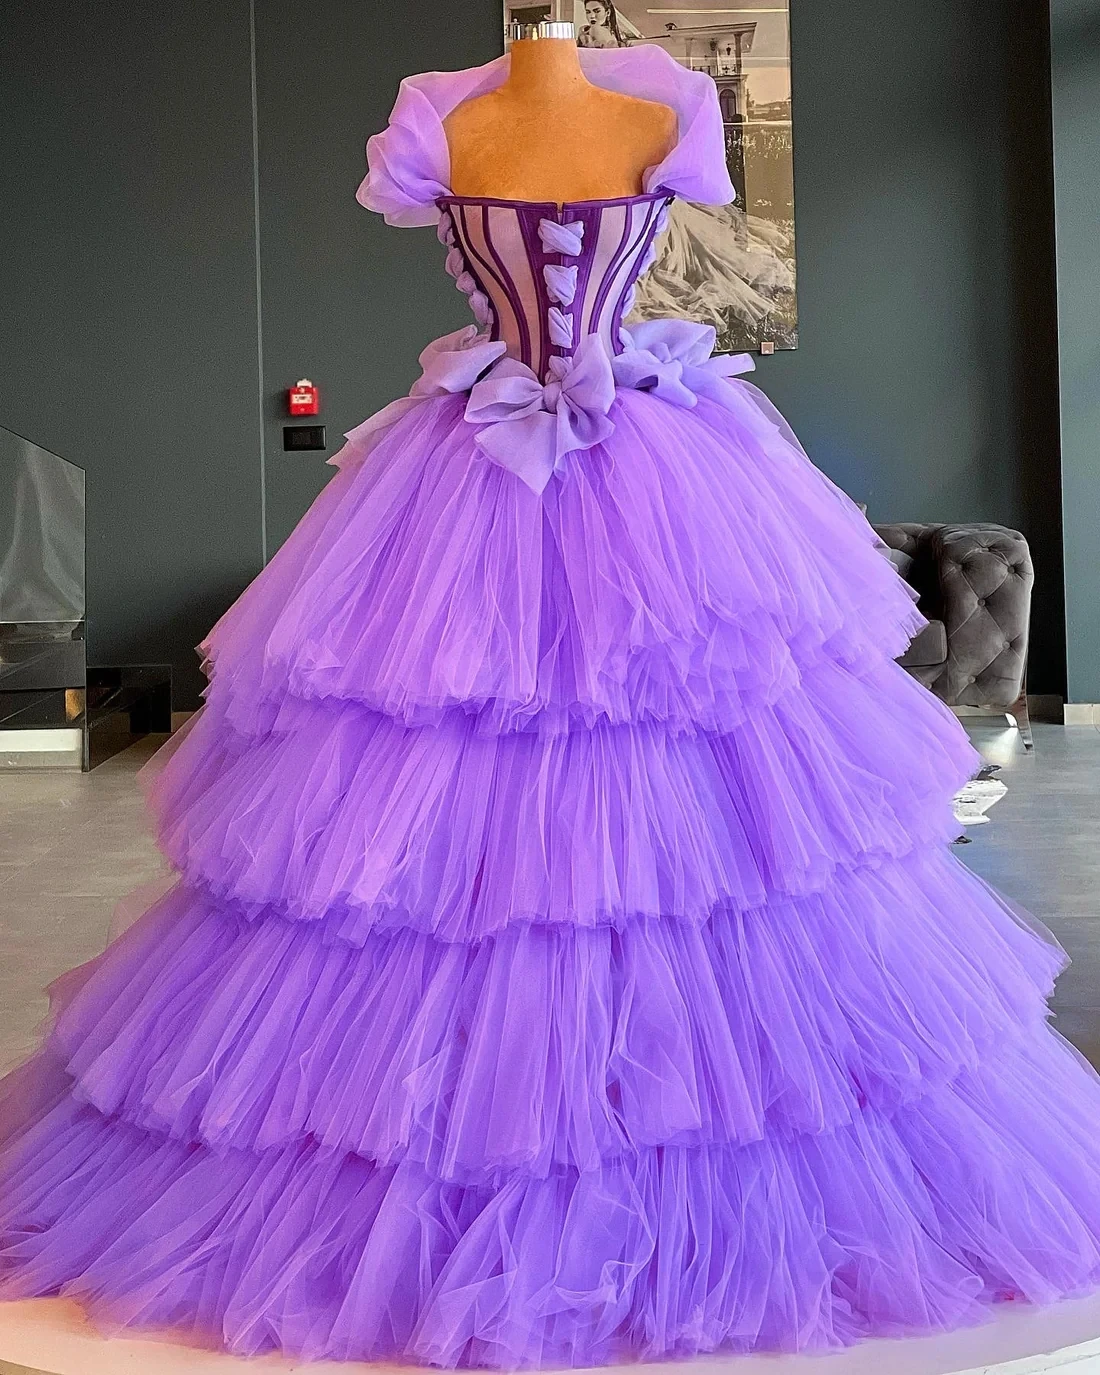 

Lavender Haute Couture Prom Dresses Ball Gown Strapless Tulle Tiered Saudi Arabia Dubai Robe De Soiree Evening Dress Gown